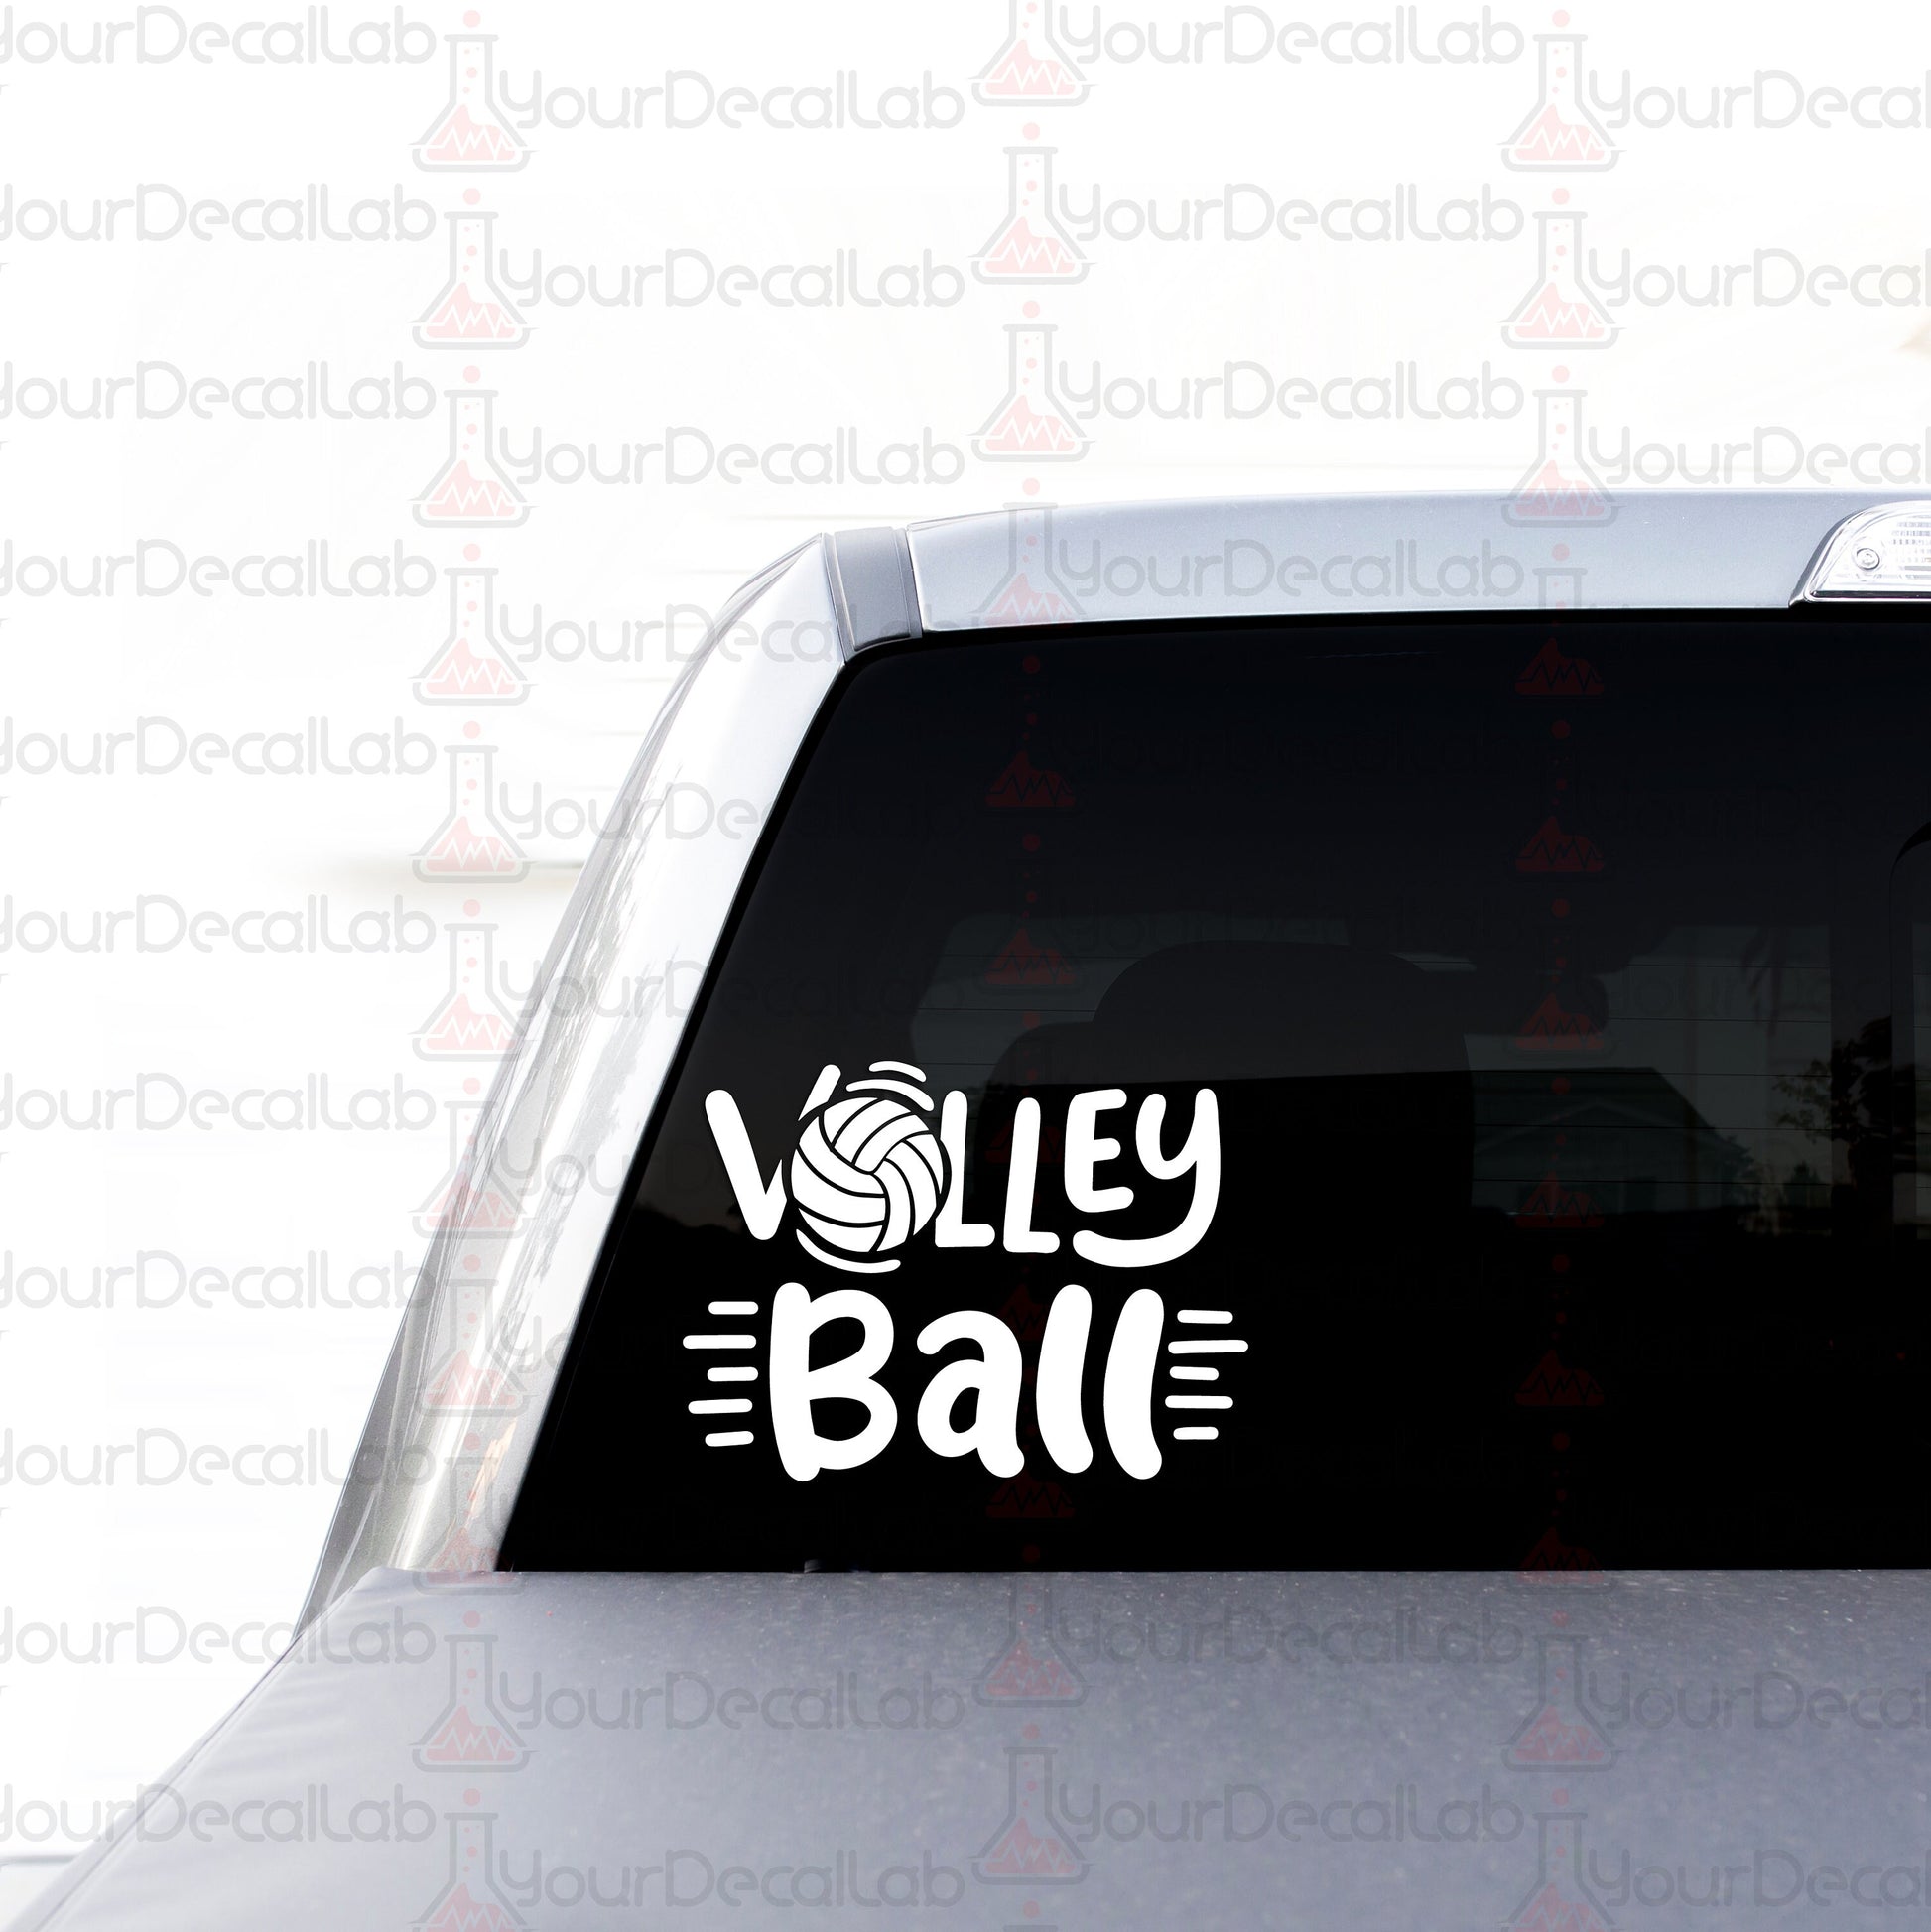 volley ball decal sticker on the back of a car